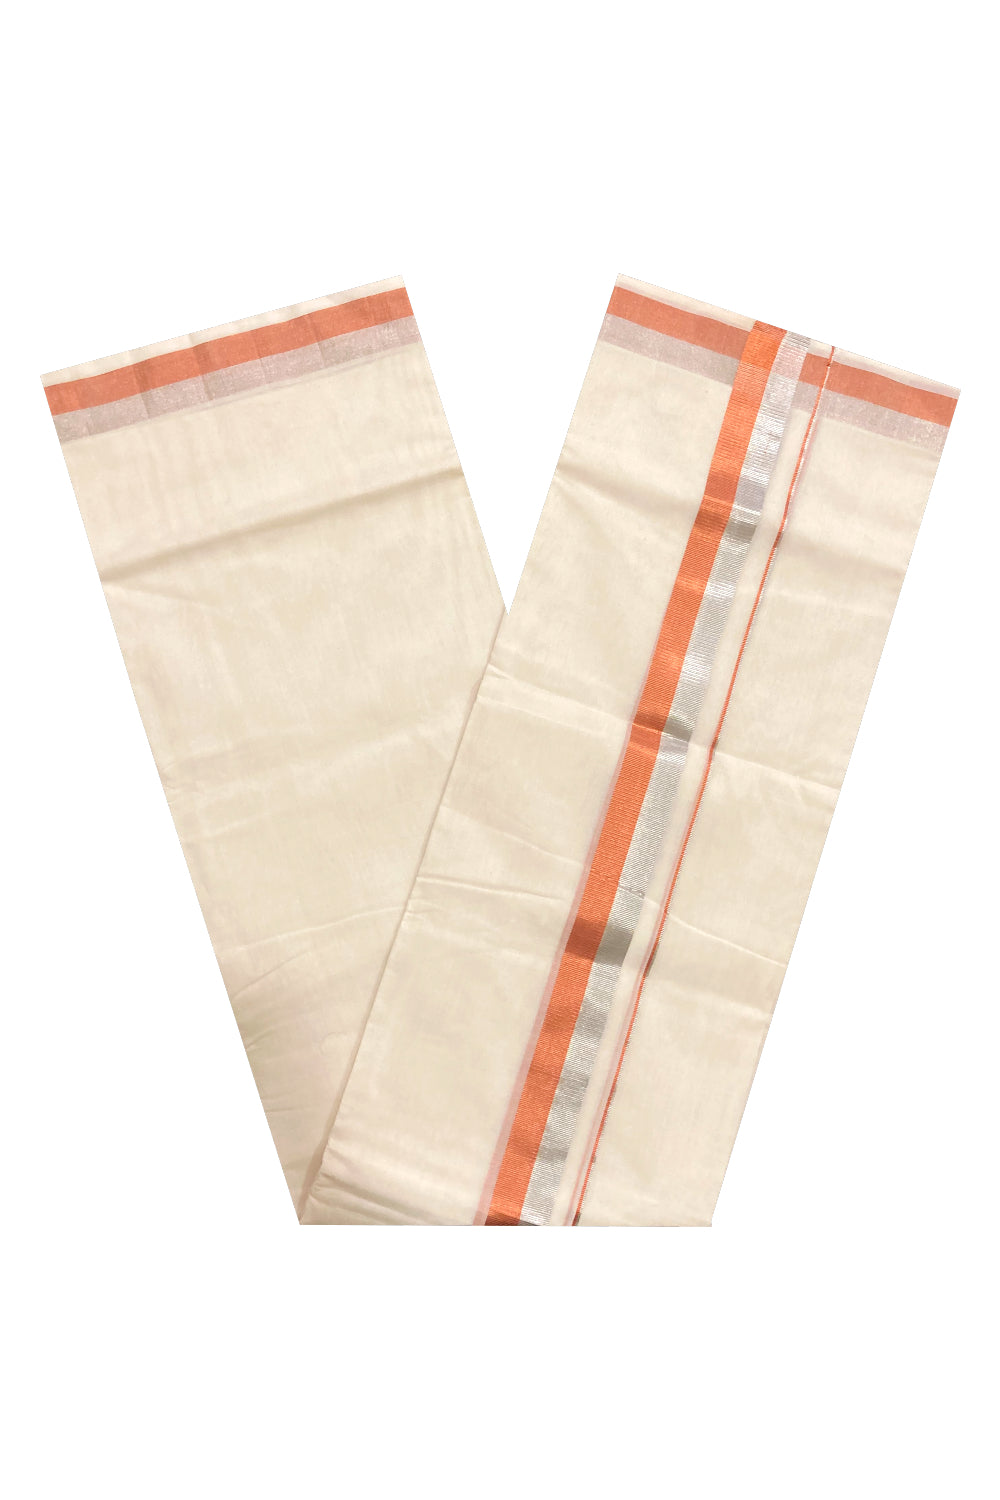 Southloom™ Premium Handloom Mundu with Silver and Copper Kasavu Border (South Indian Dhoti) 2 inch